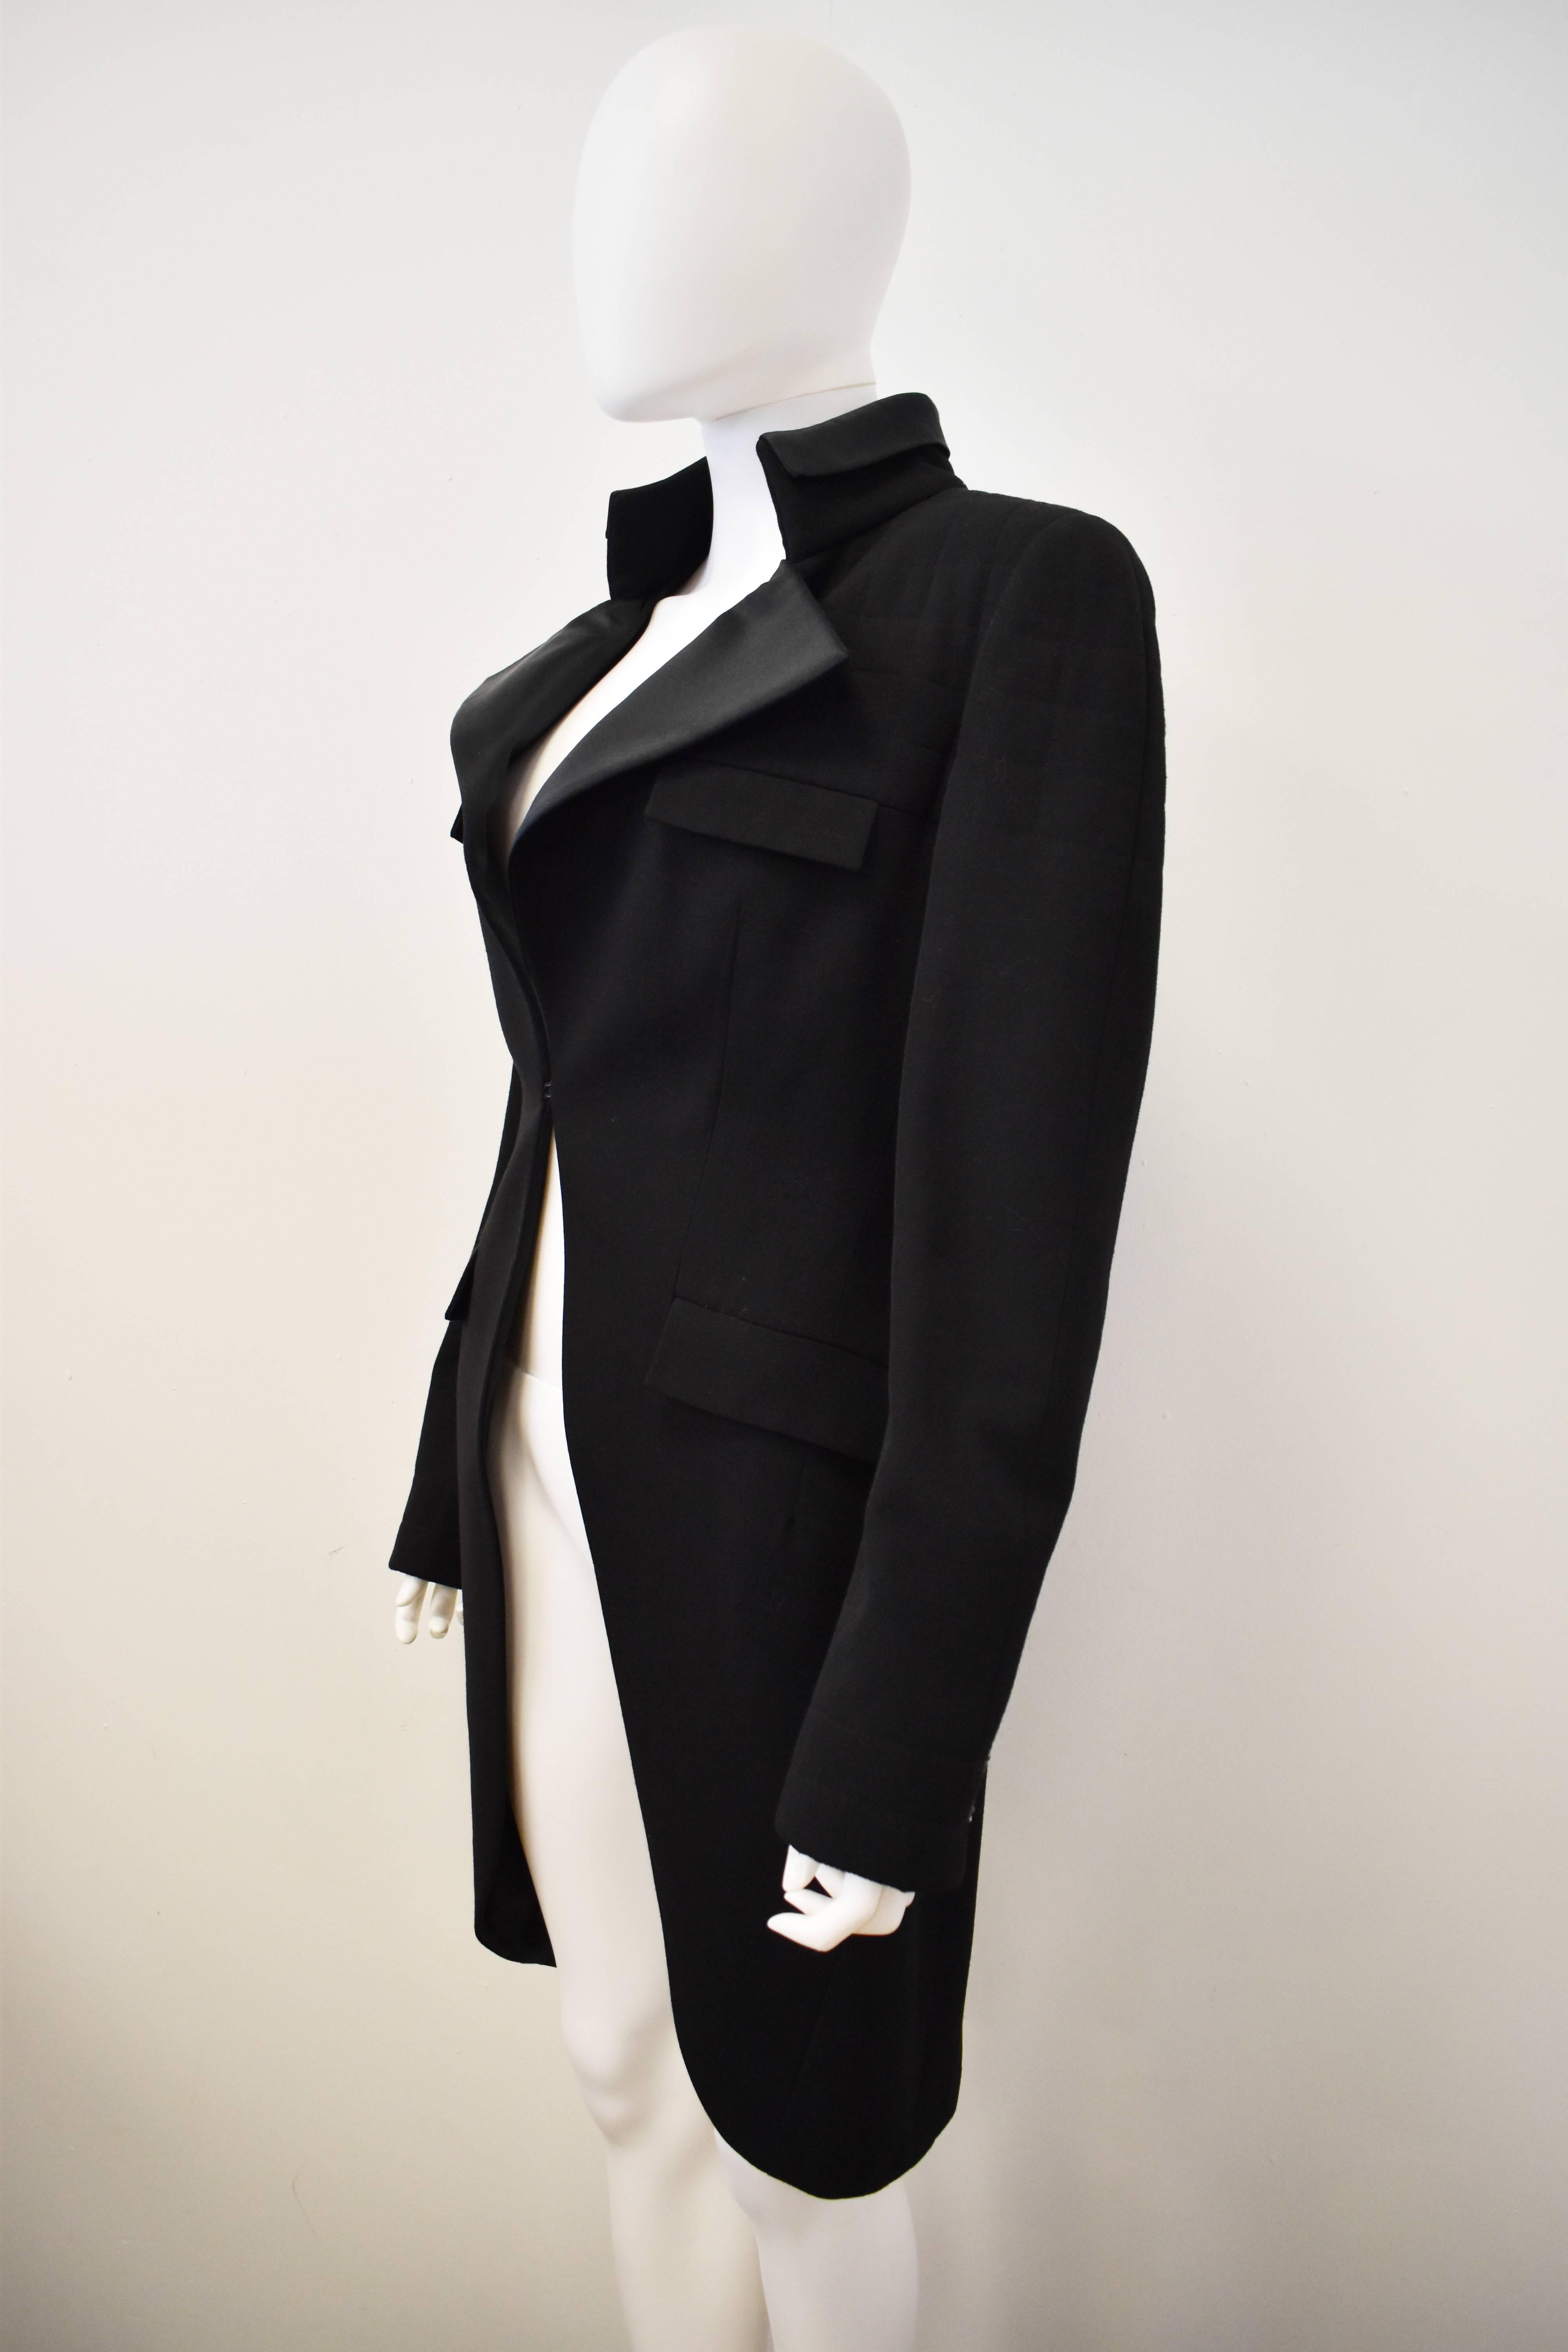 Chanel Black Tuxedo Coat 2006 In Excellent Condition For Sale In London, GB